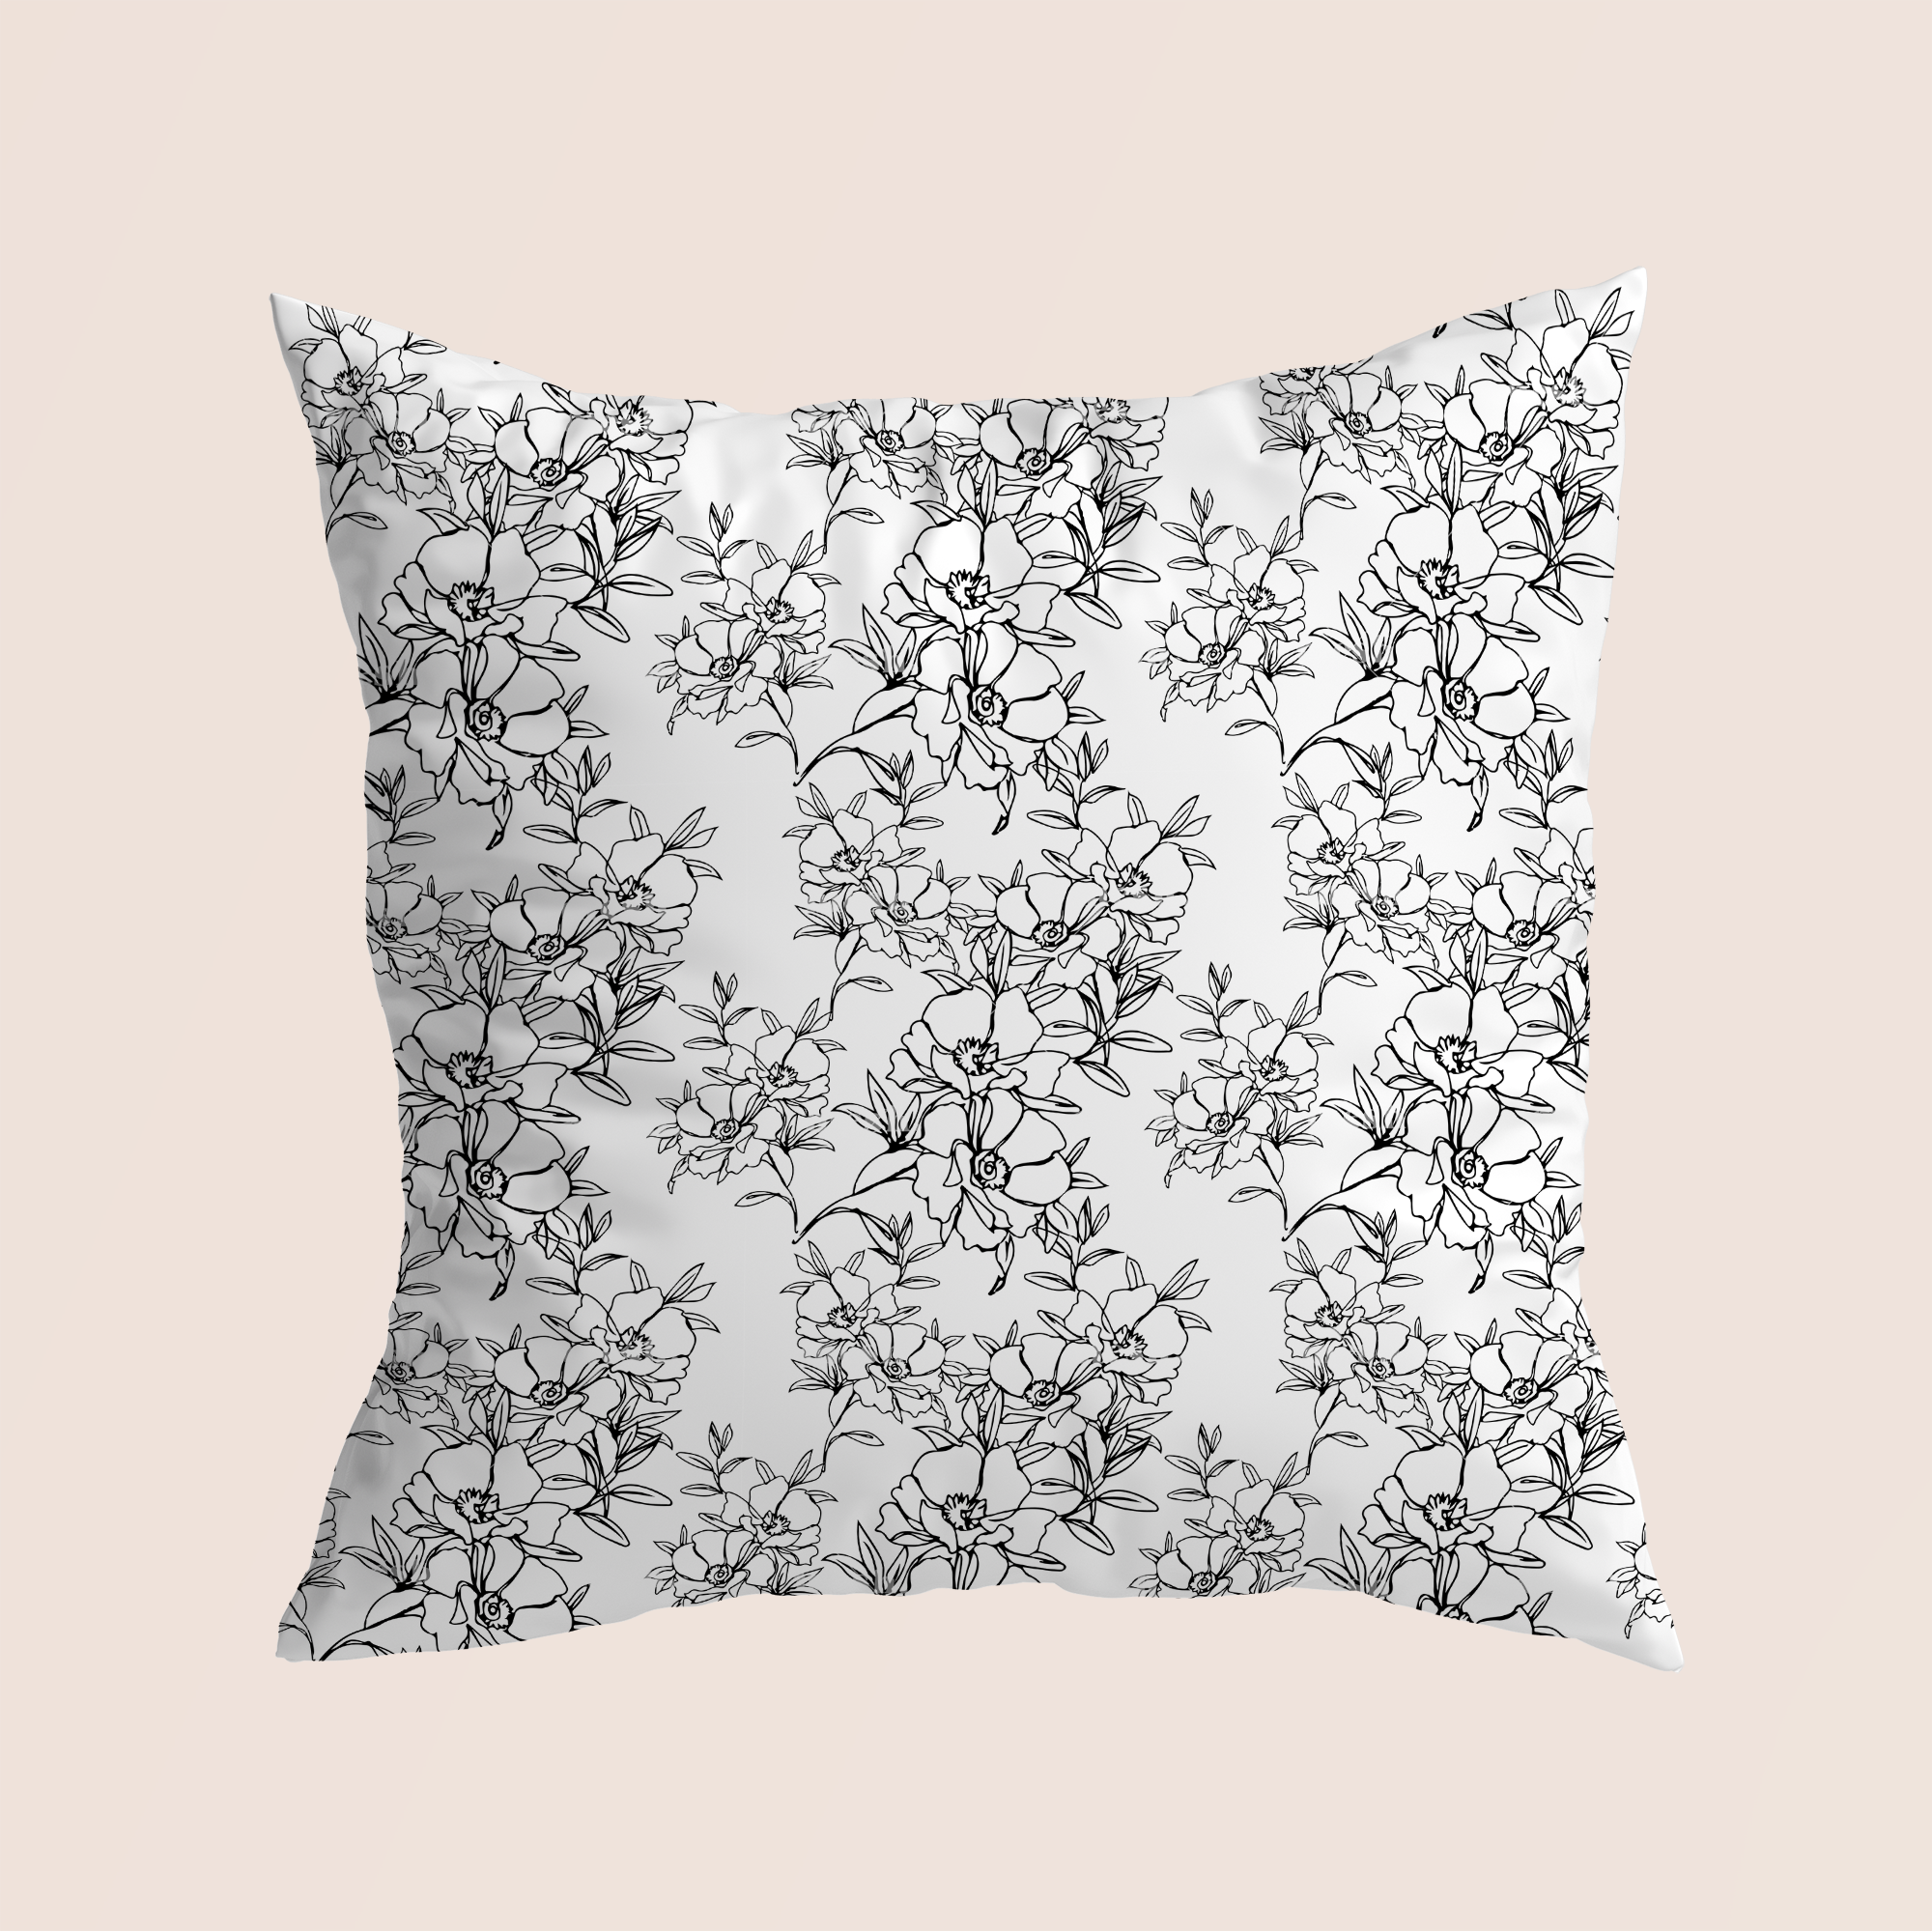 Floral dream full basic in white pattern design printed on recycled fabric canvas mockup